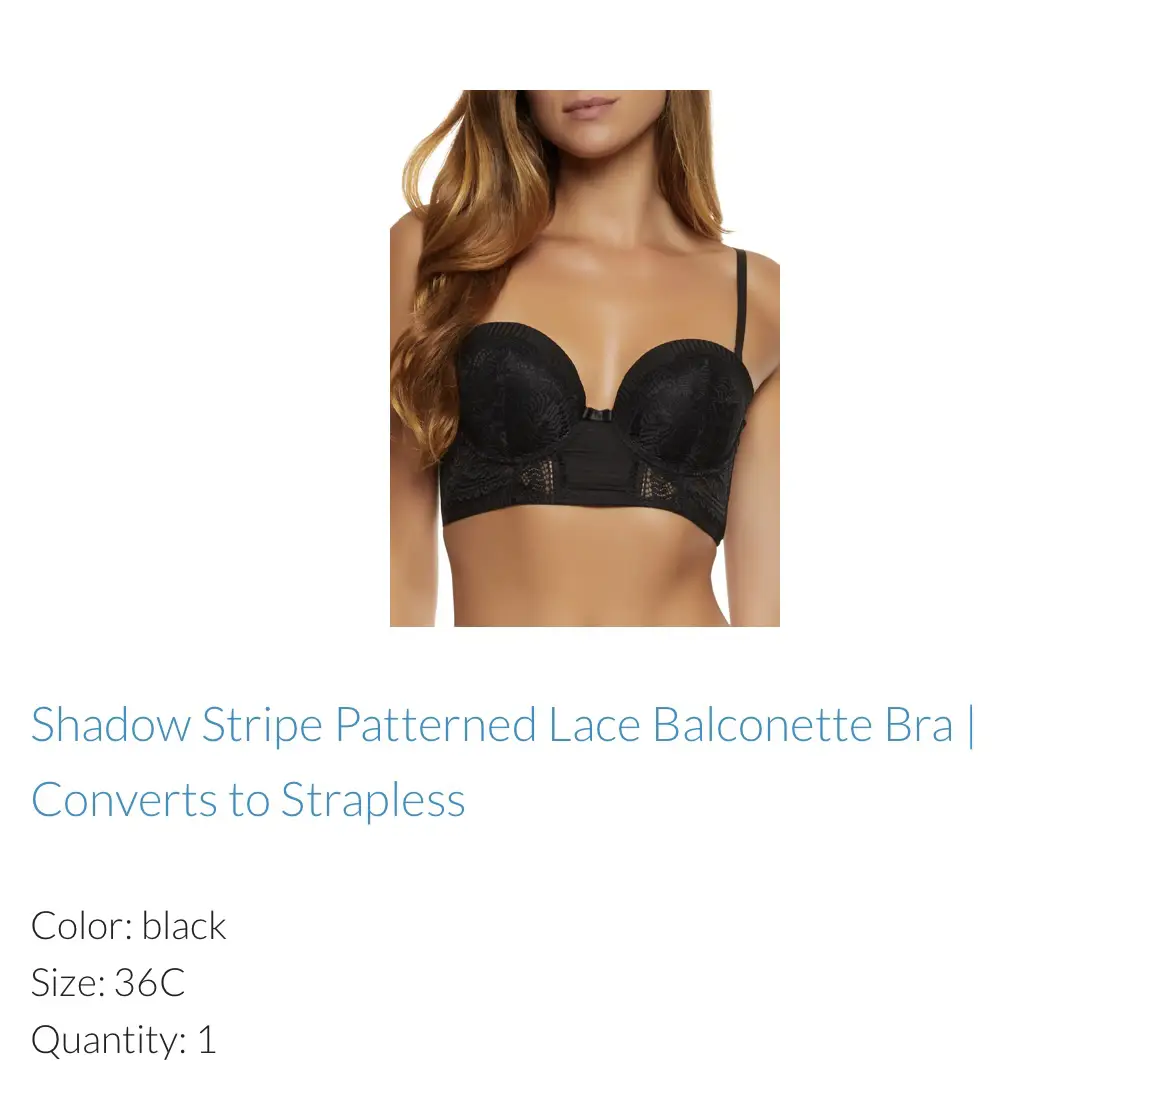 Marlene Black 1/4 Cup bra with Lace Curve